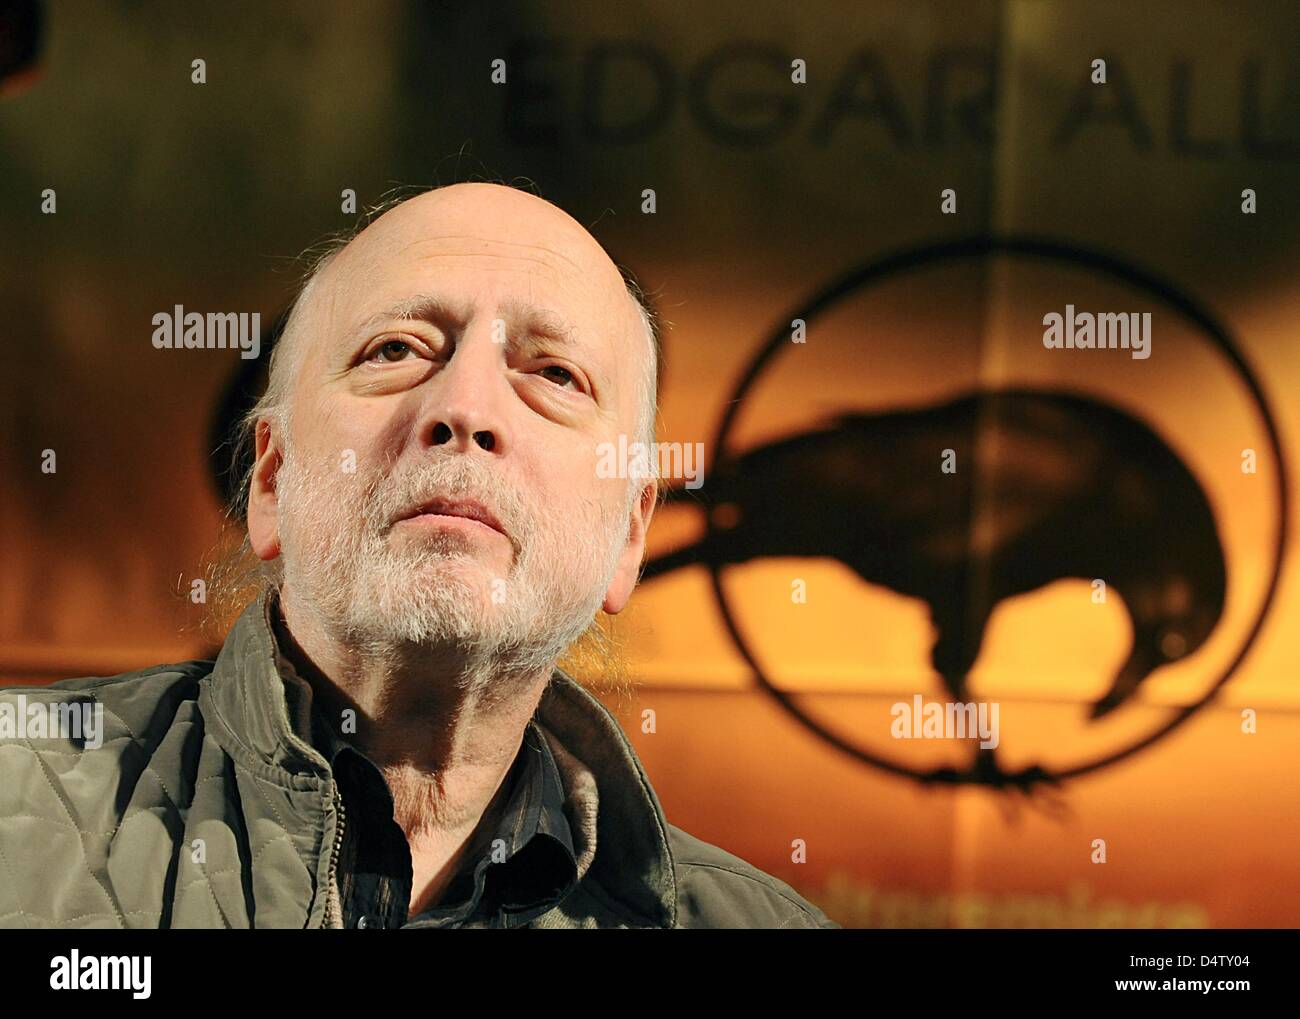 FILE - British composer and writer Eric Woolfson attends a press conference for the musical 'Edgar Allan Poe' in Berlin, Germany, 16 January 2009. Woolfson died aged 64 on 03 December 2009. He was cofounder of the rock band 'The Alan Parsons Project' and composed musicals like 'Gaudi', 'Gambler', 'Dancing shadows' and 'Edgar Allan Poe', which premiered in Halle, Germany, August 200 Stock Photo